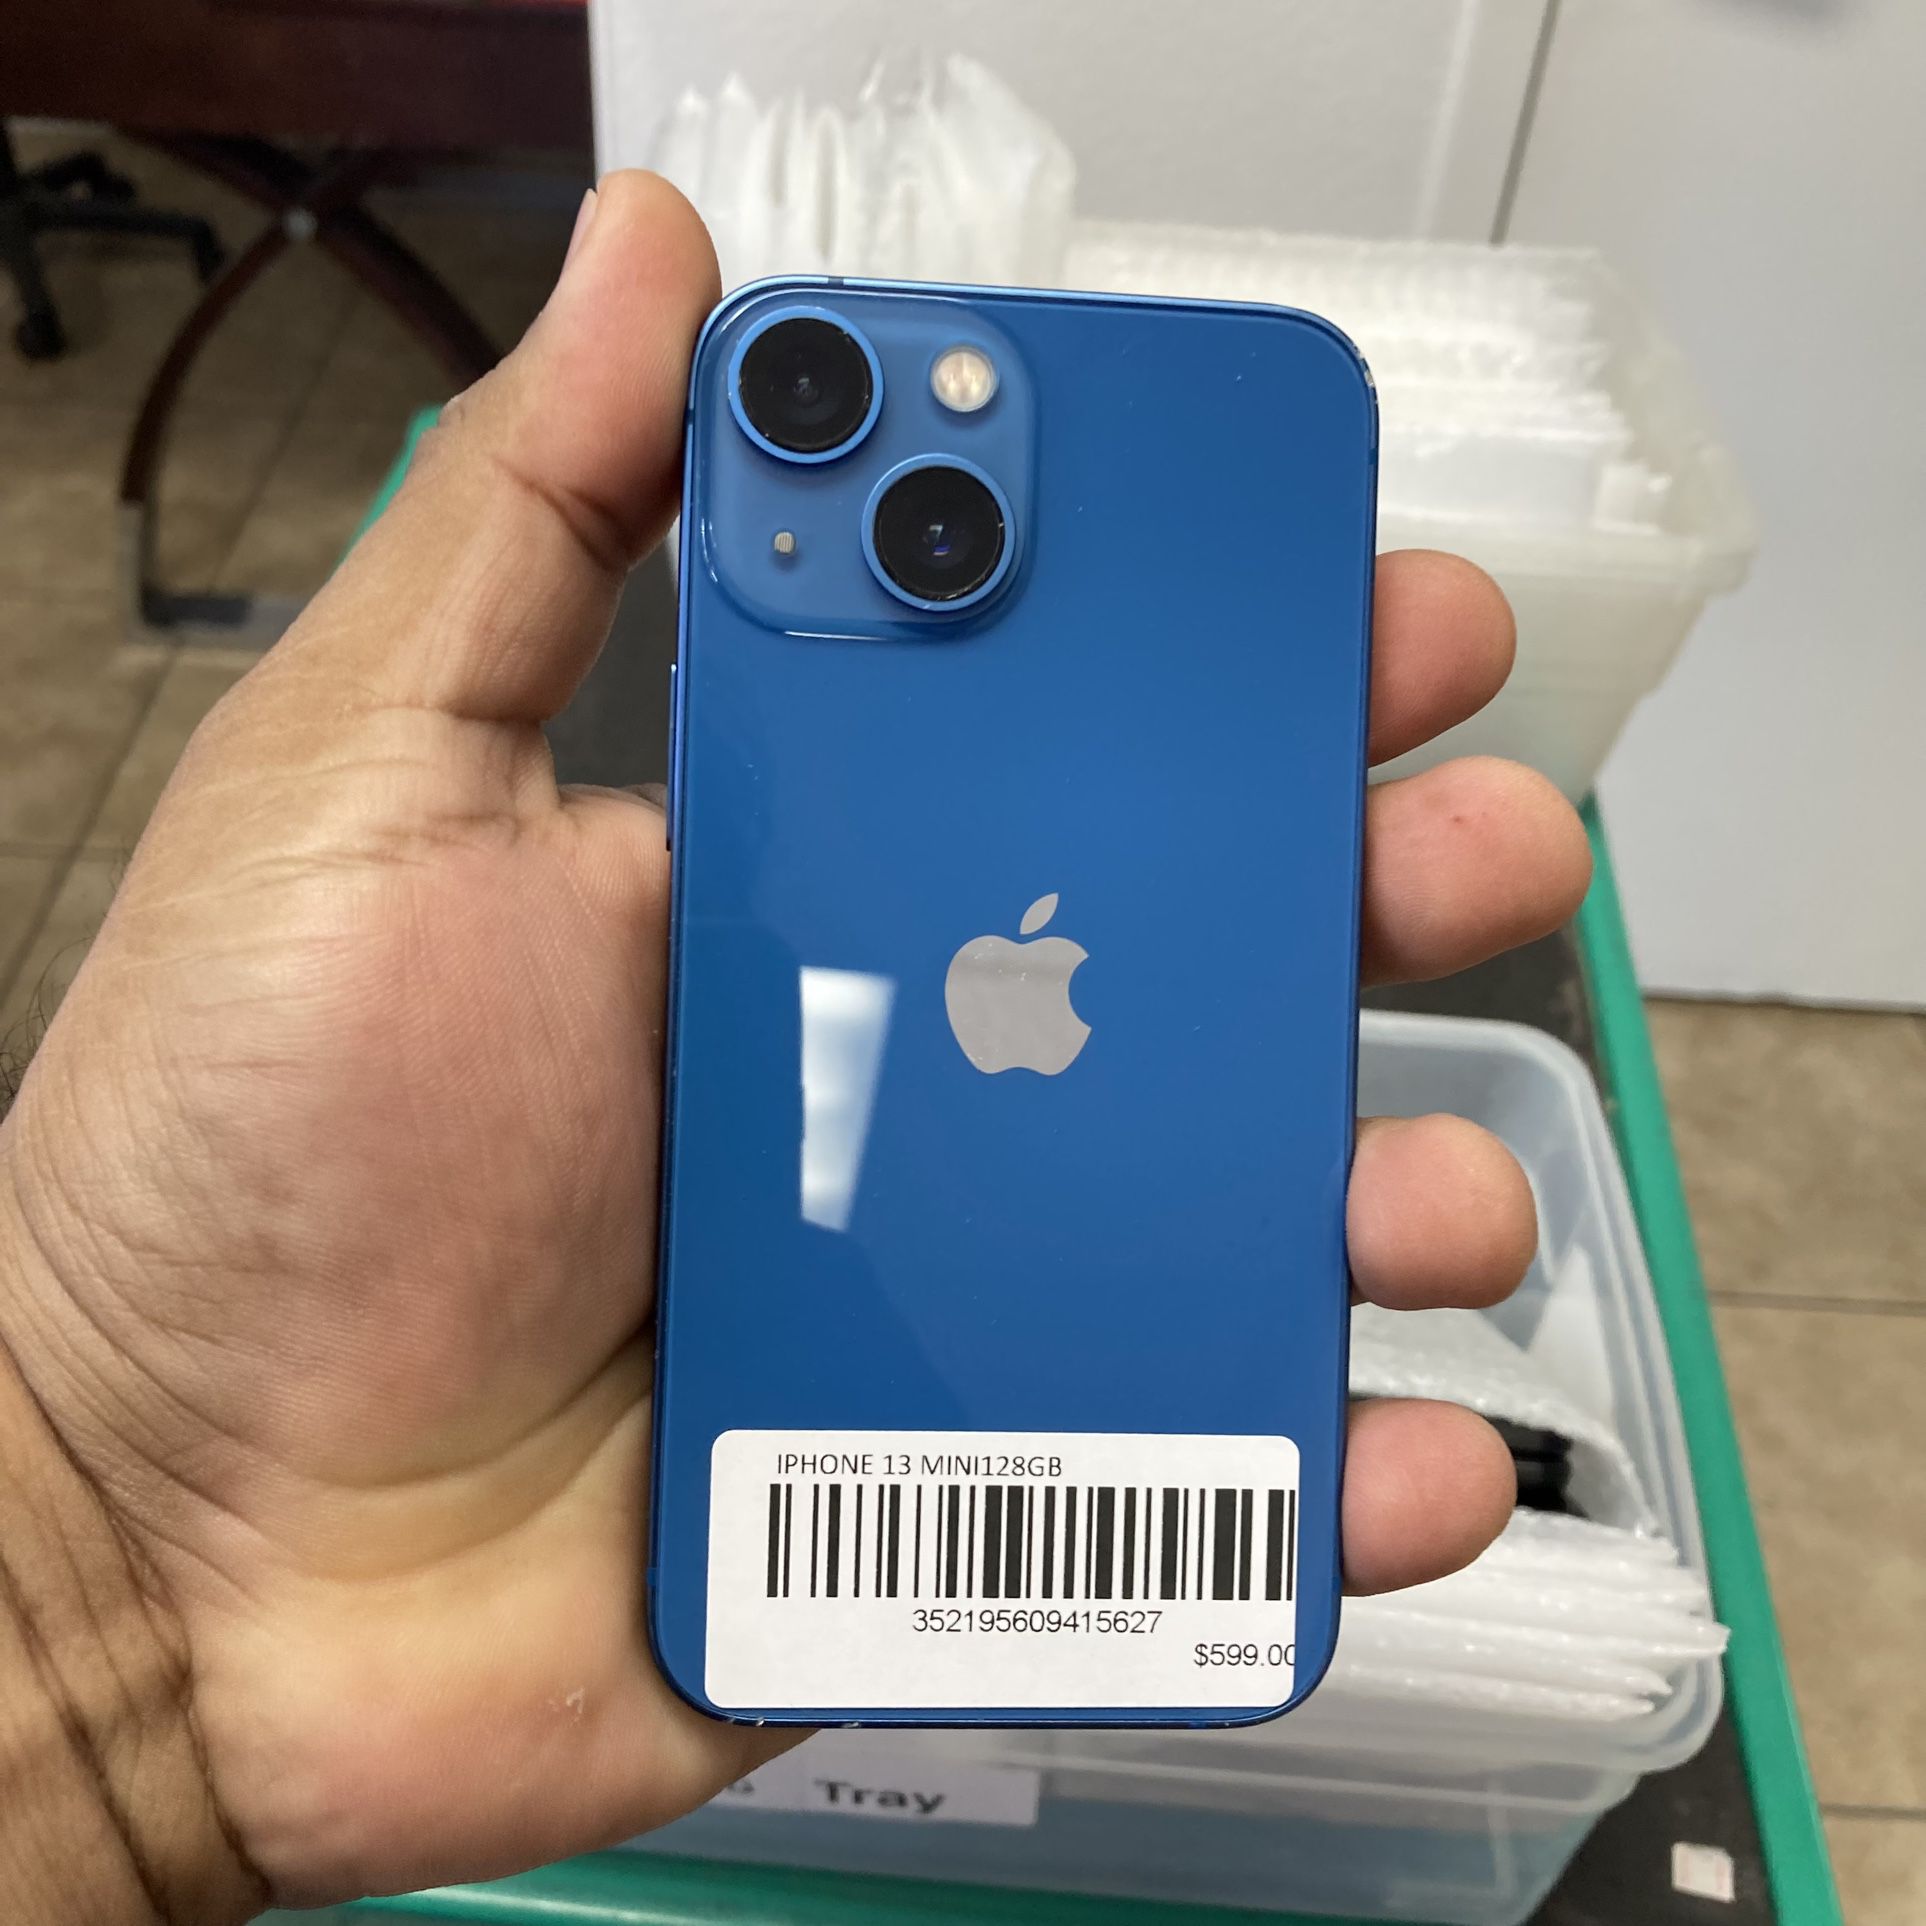 RED ATT 128 GB IPHONE 13 MINI for Sale in Spanish Springs, NV - OfferUp